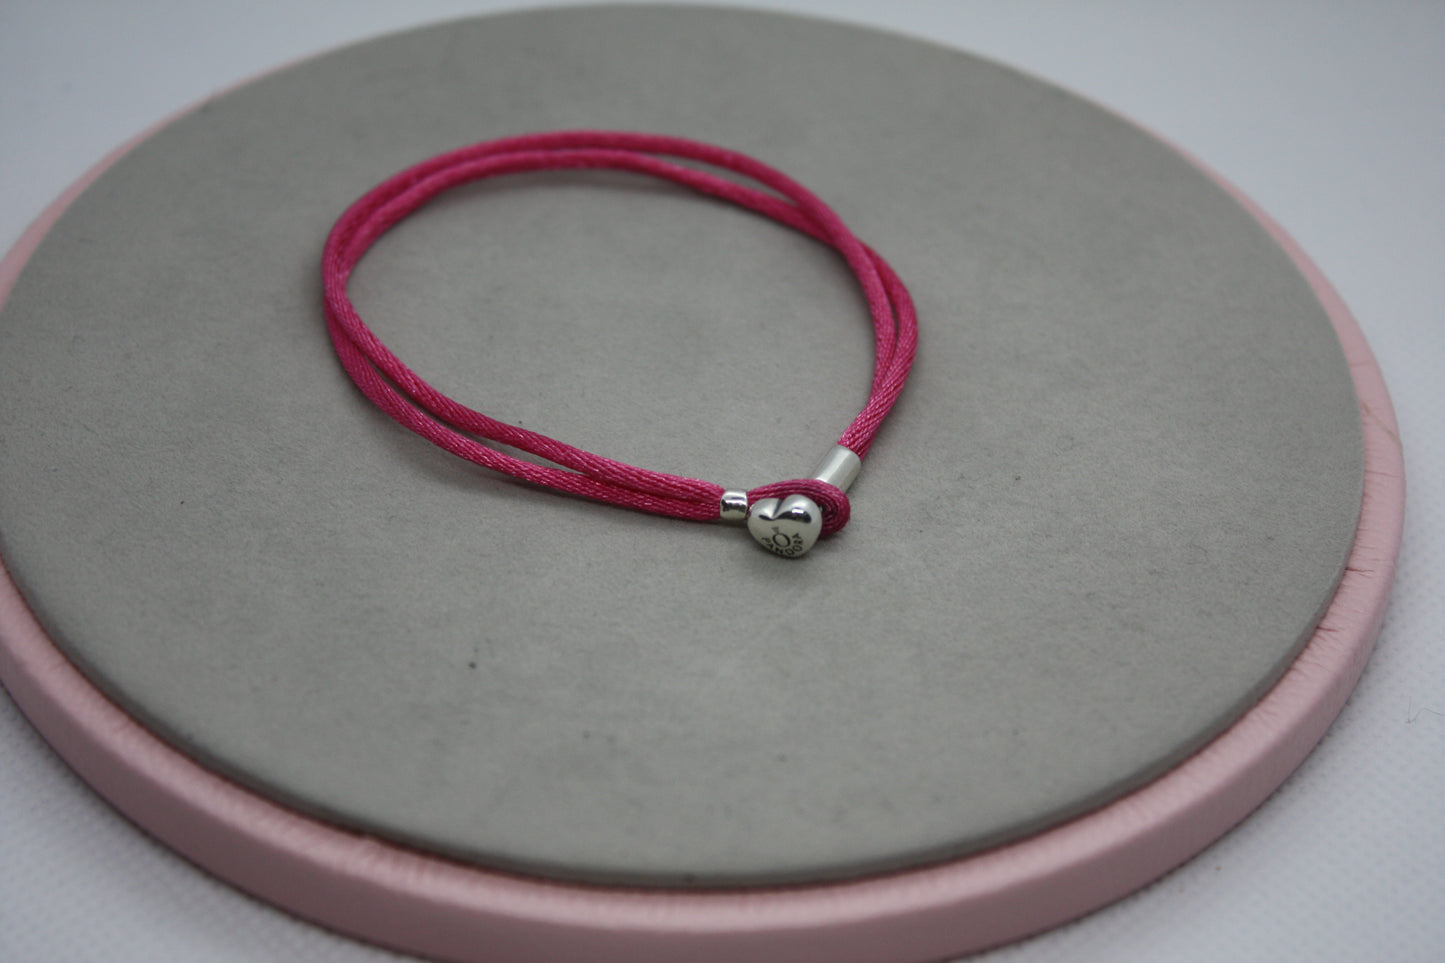 Genuine Pandora Pink Material Bracelet with Silver Heart Securing